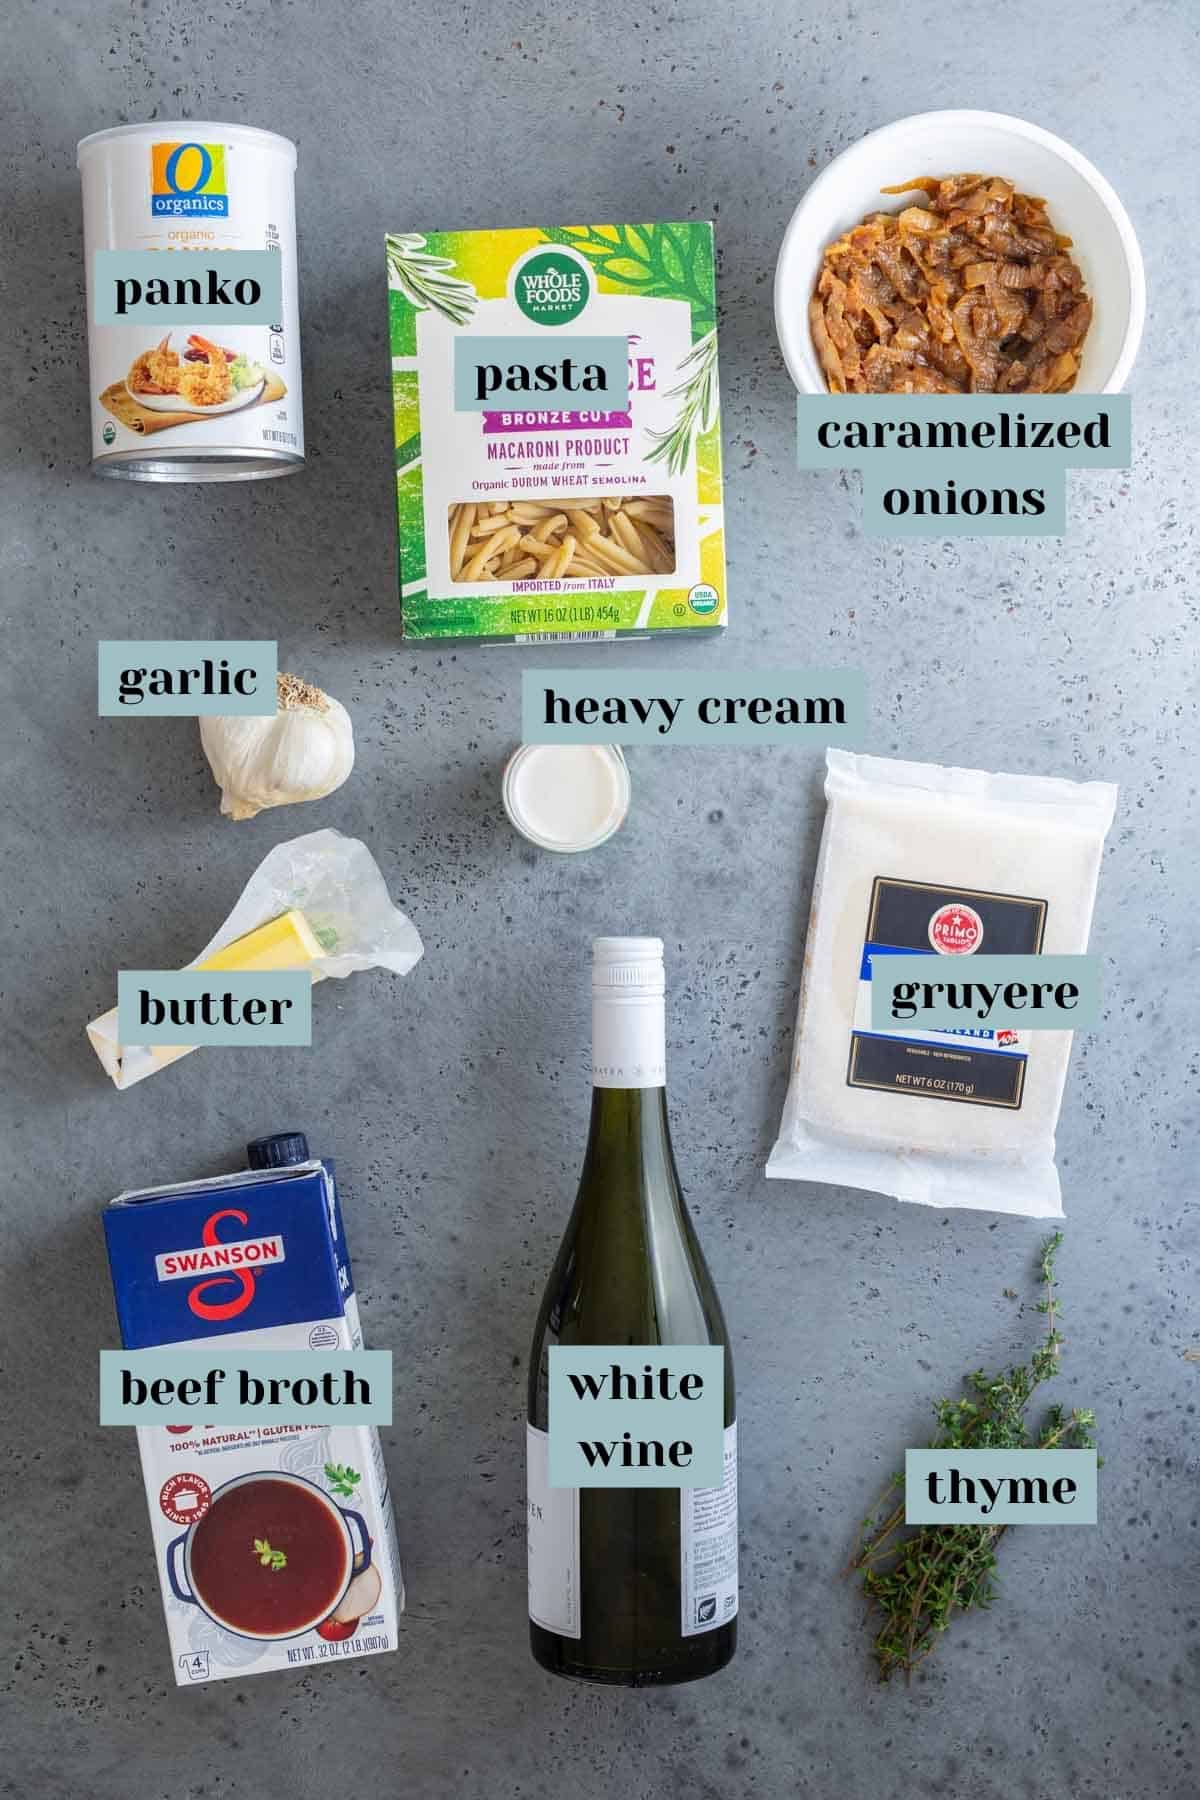 Various ingredients for cooking laid out on a gray surface, including panko, pasta, caramelized onions, garlic, heavy cream, butter, beef broth, white wine, gruyere cheese, and thyme.